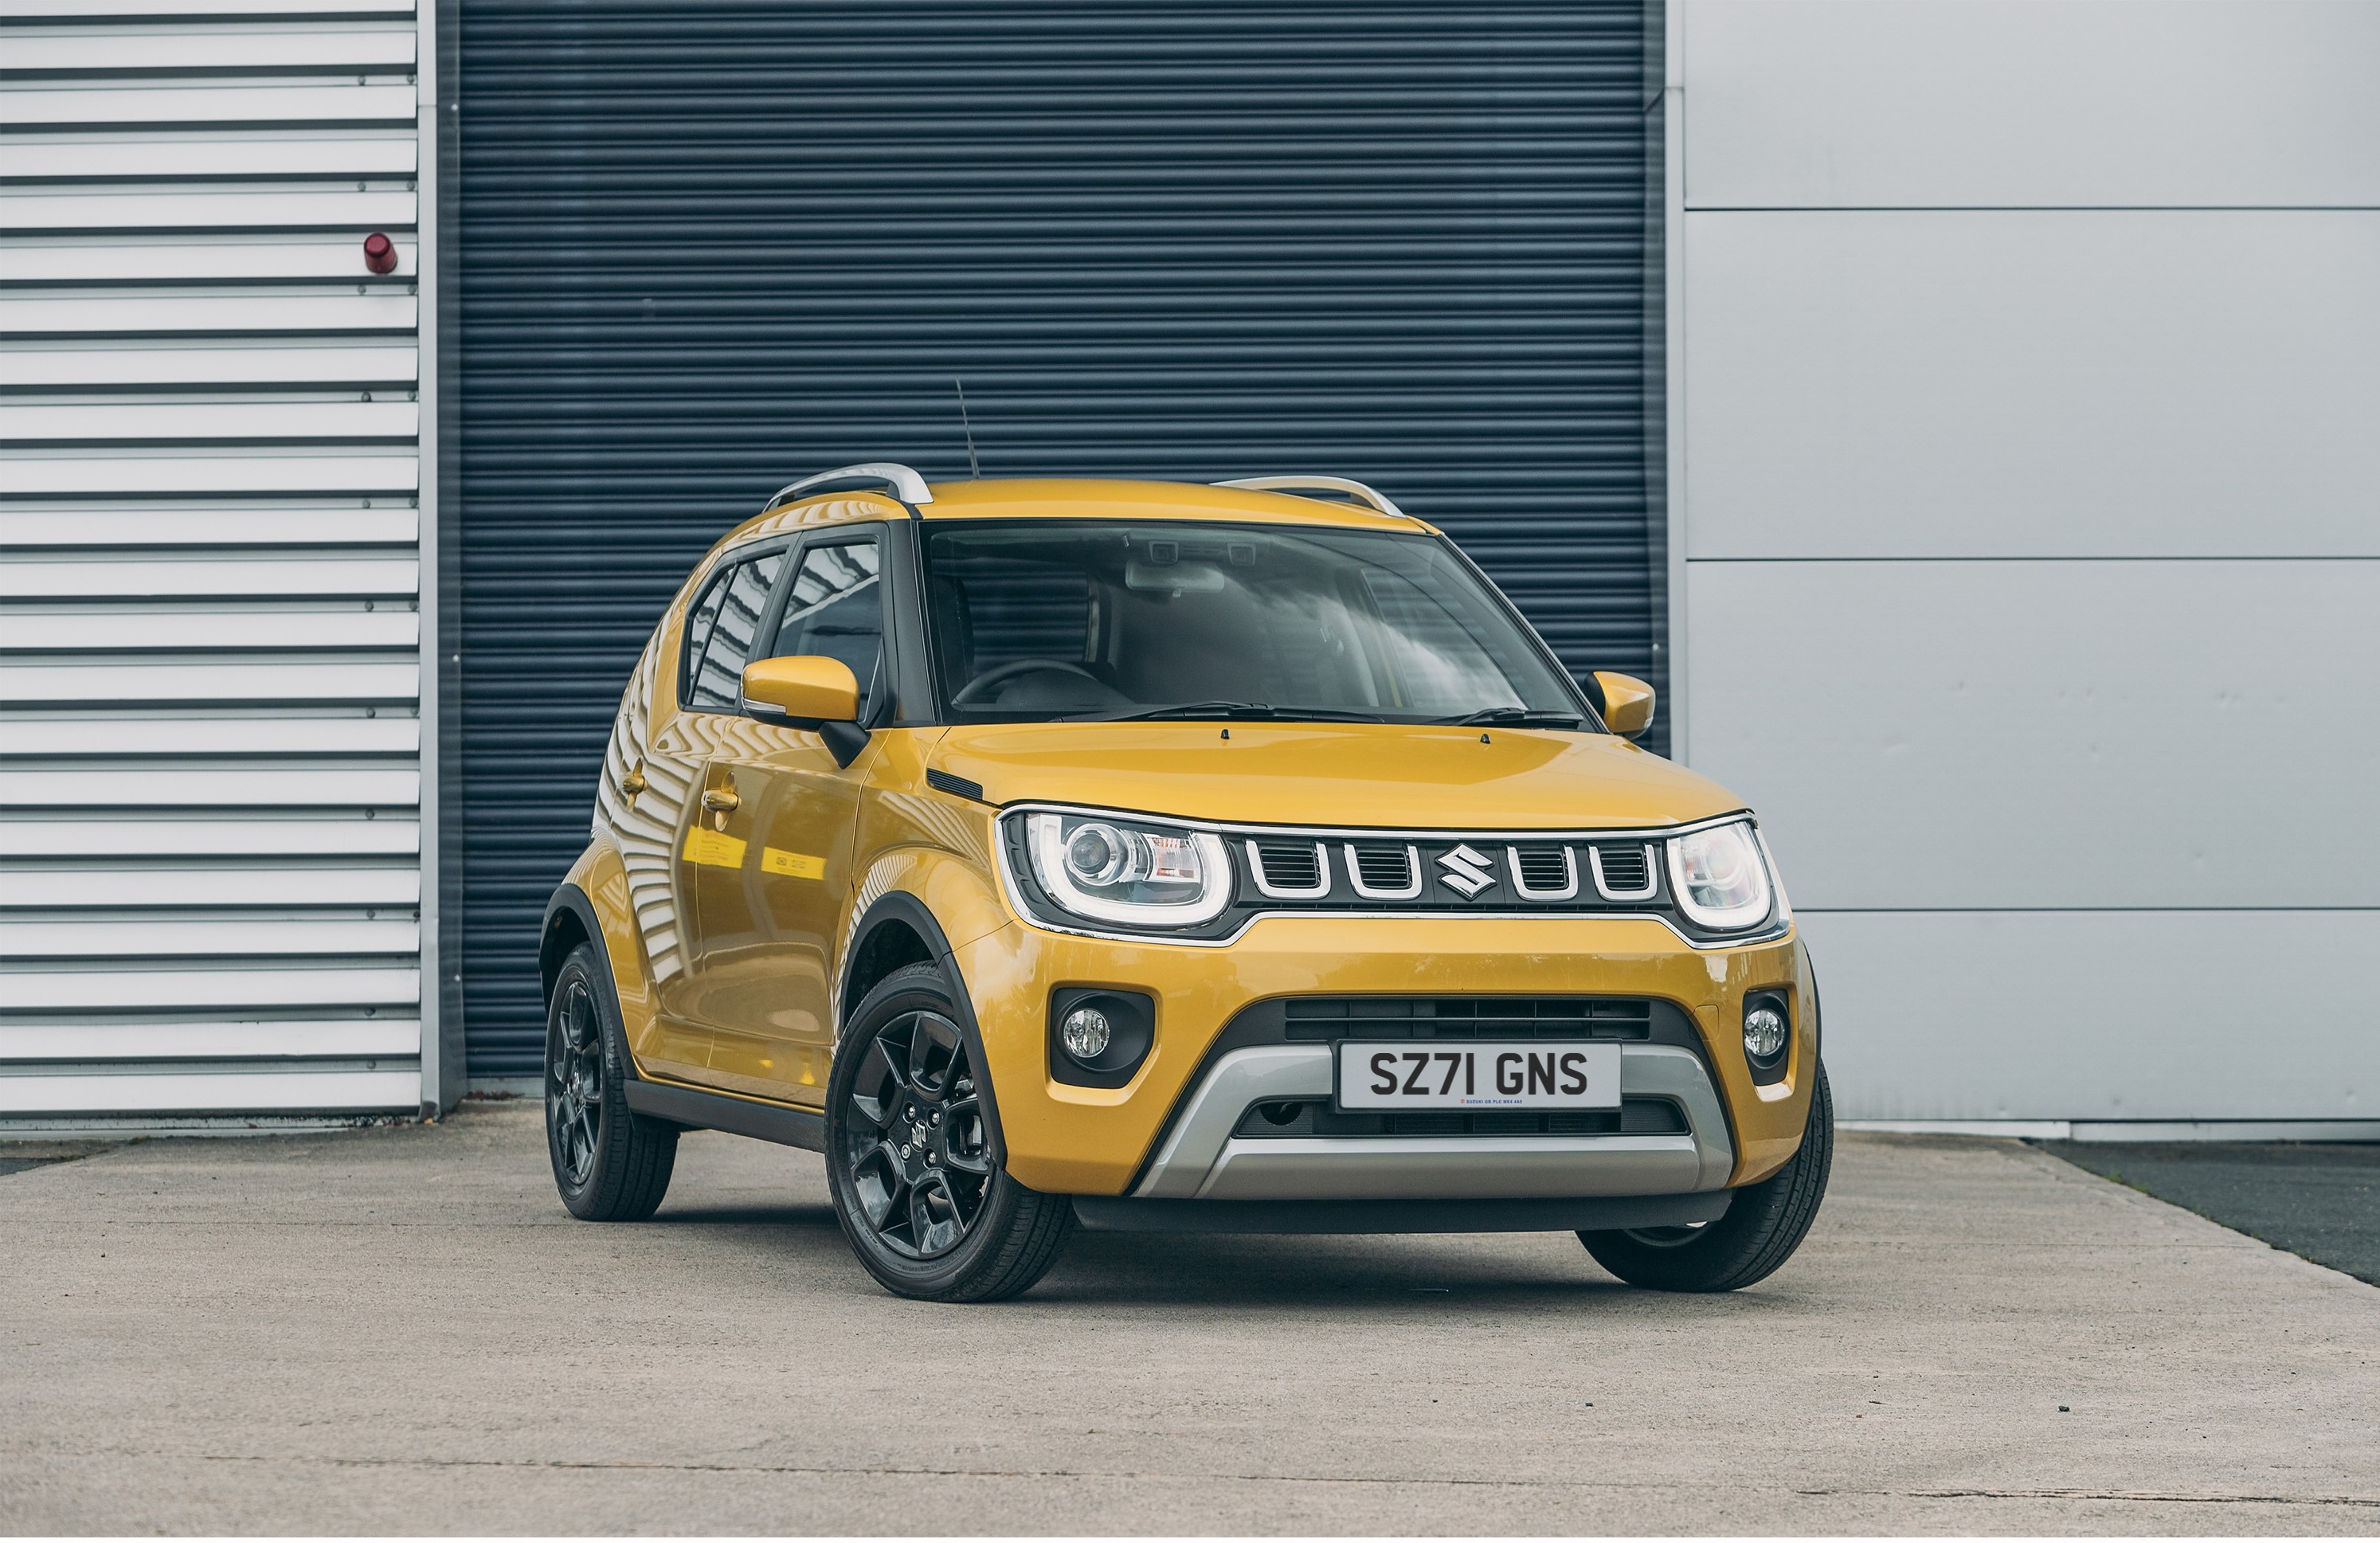 Category wins for Suzuki Ignis at the 2022 What Car? Awards